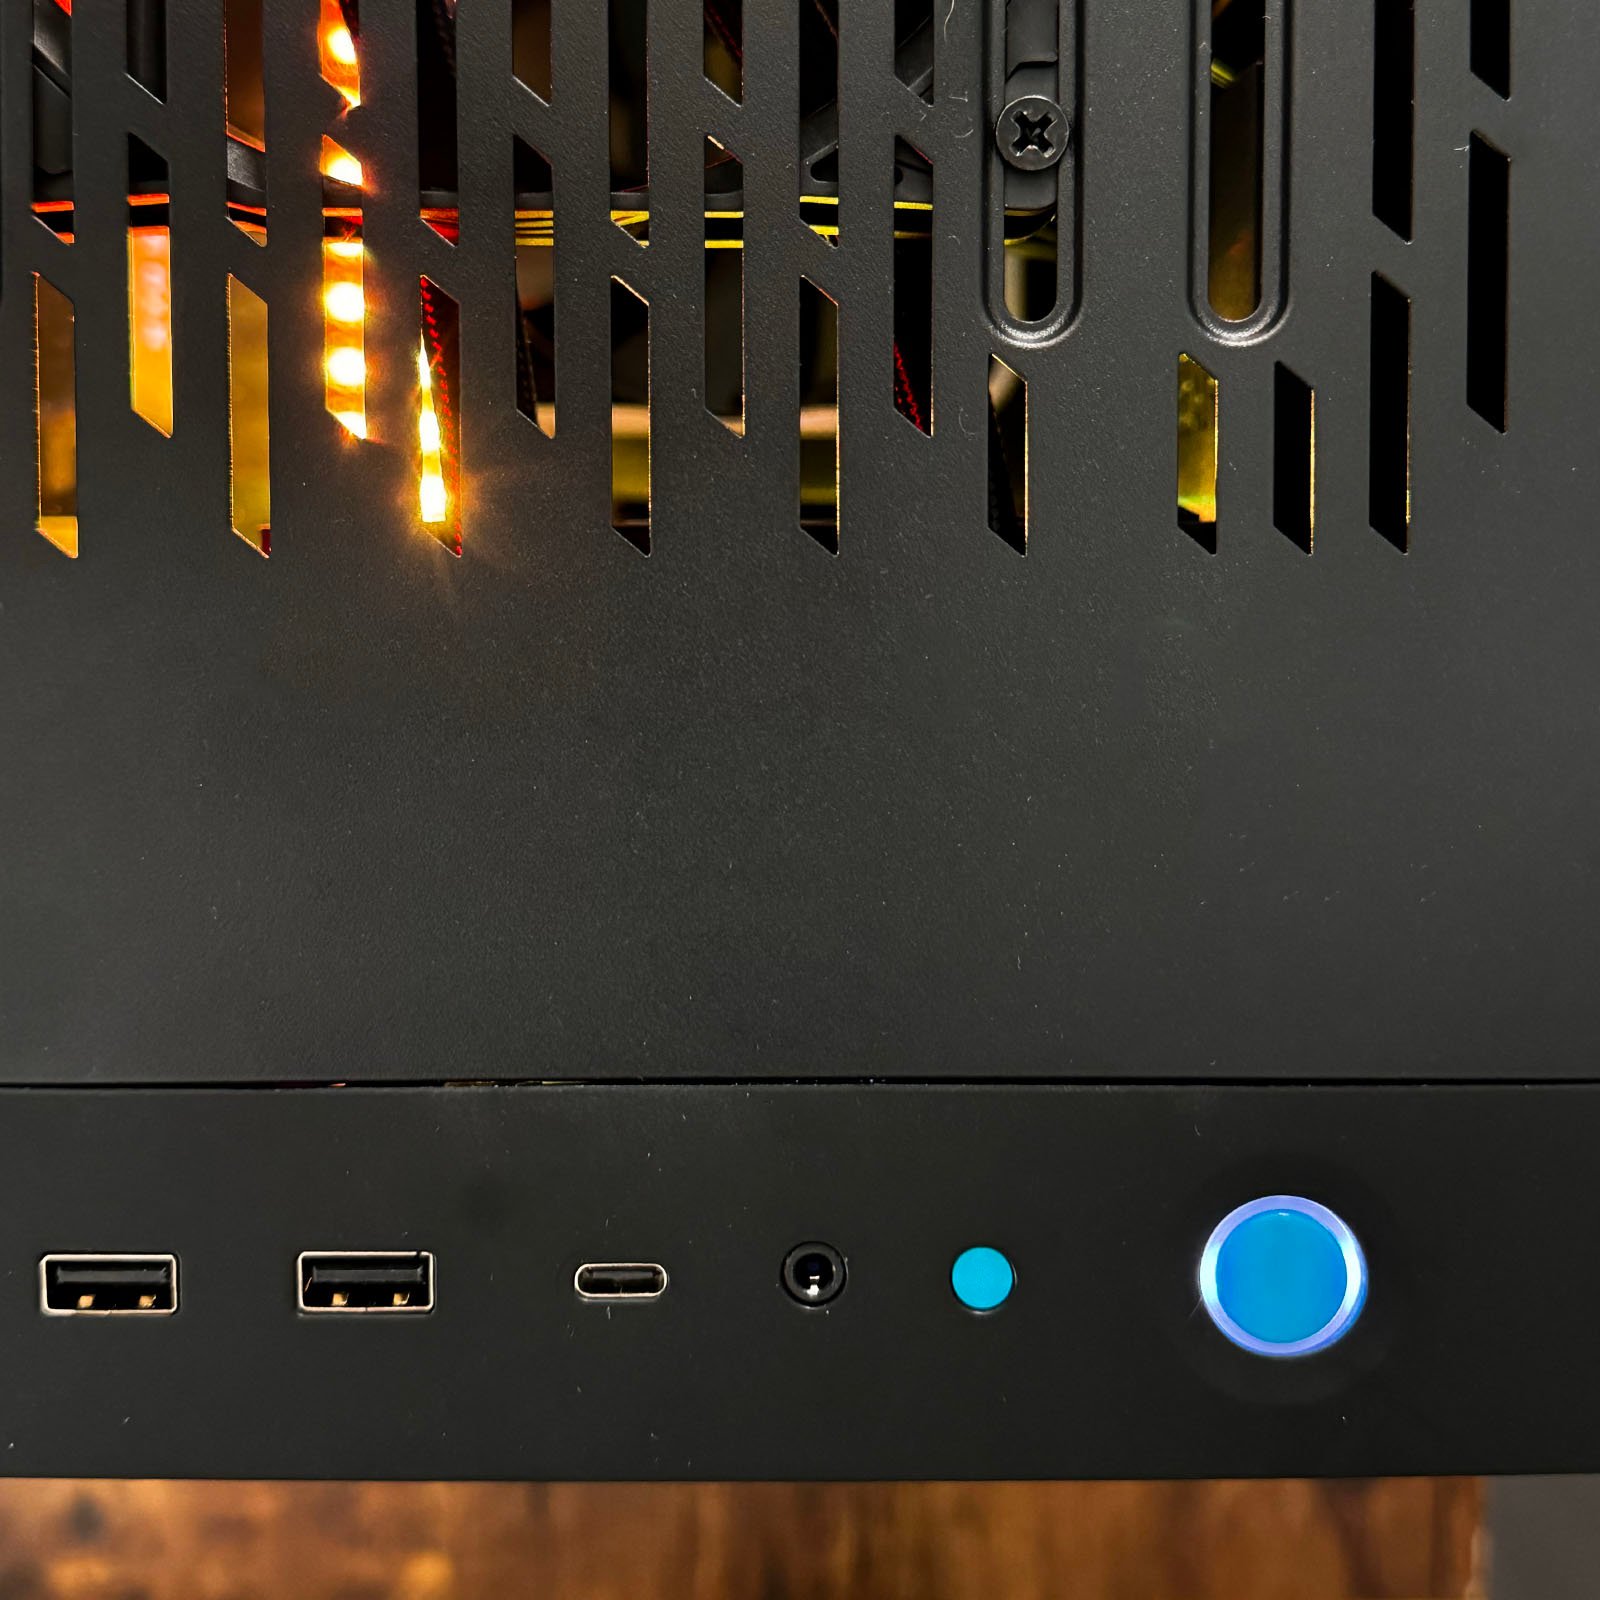 Close-up of a computer casing highlighting ventilation slits on the top half and multiple ports at the bottom. Ports include two USB-A ports, one USB-C port, a headphone jack, a small blue button, and a larger illuminated blue power button.